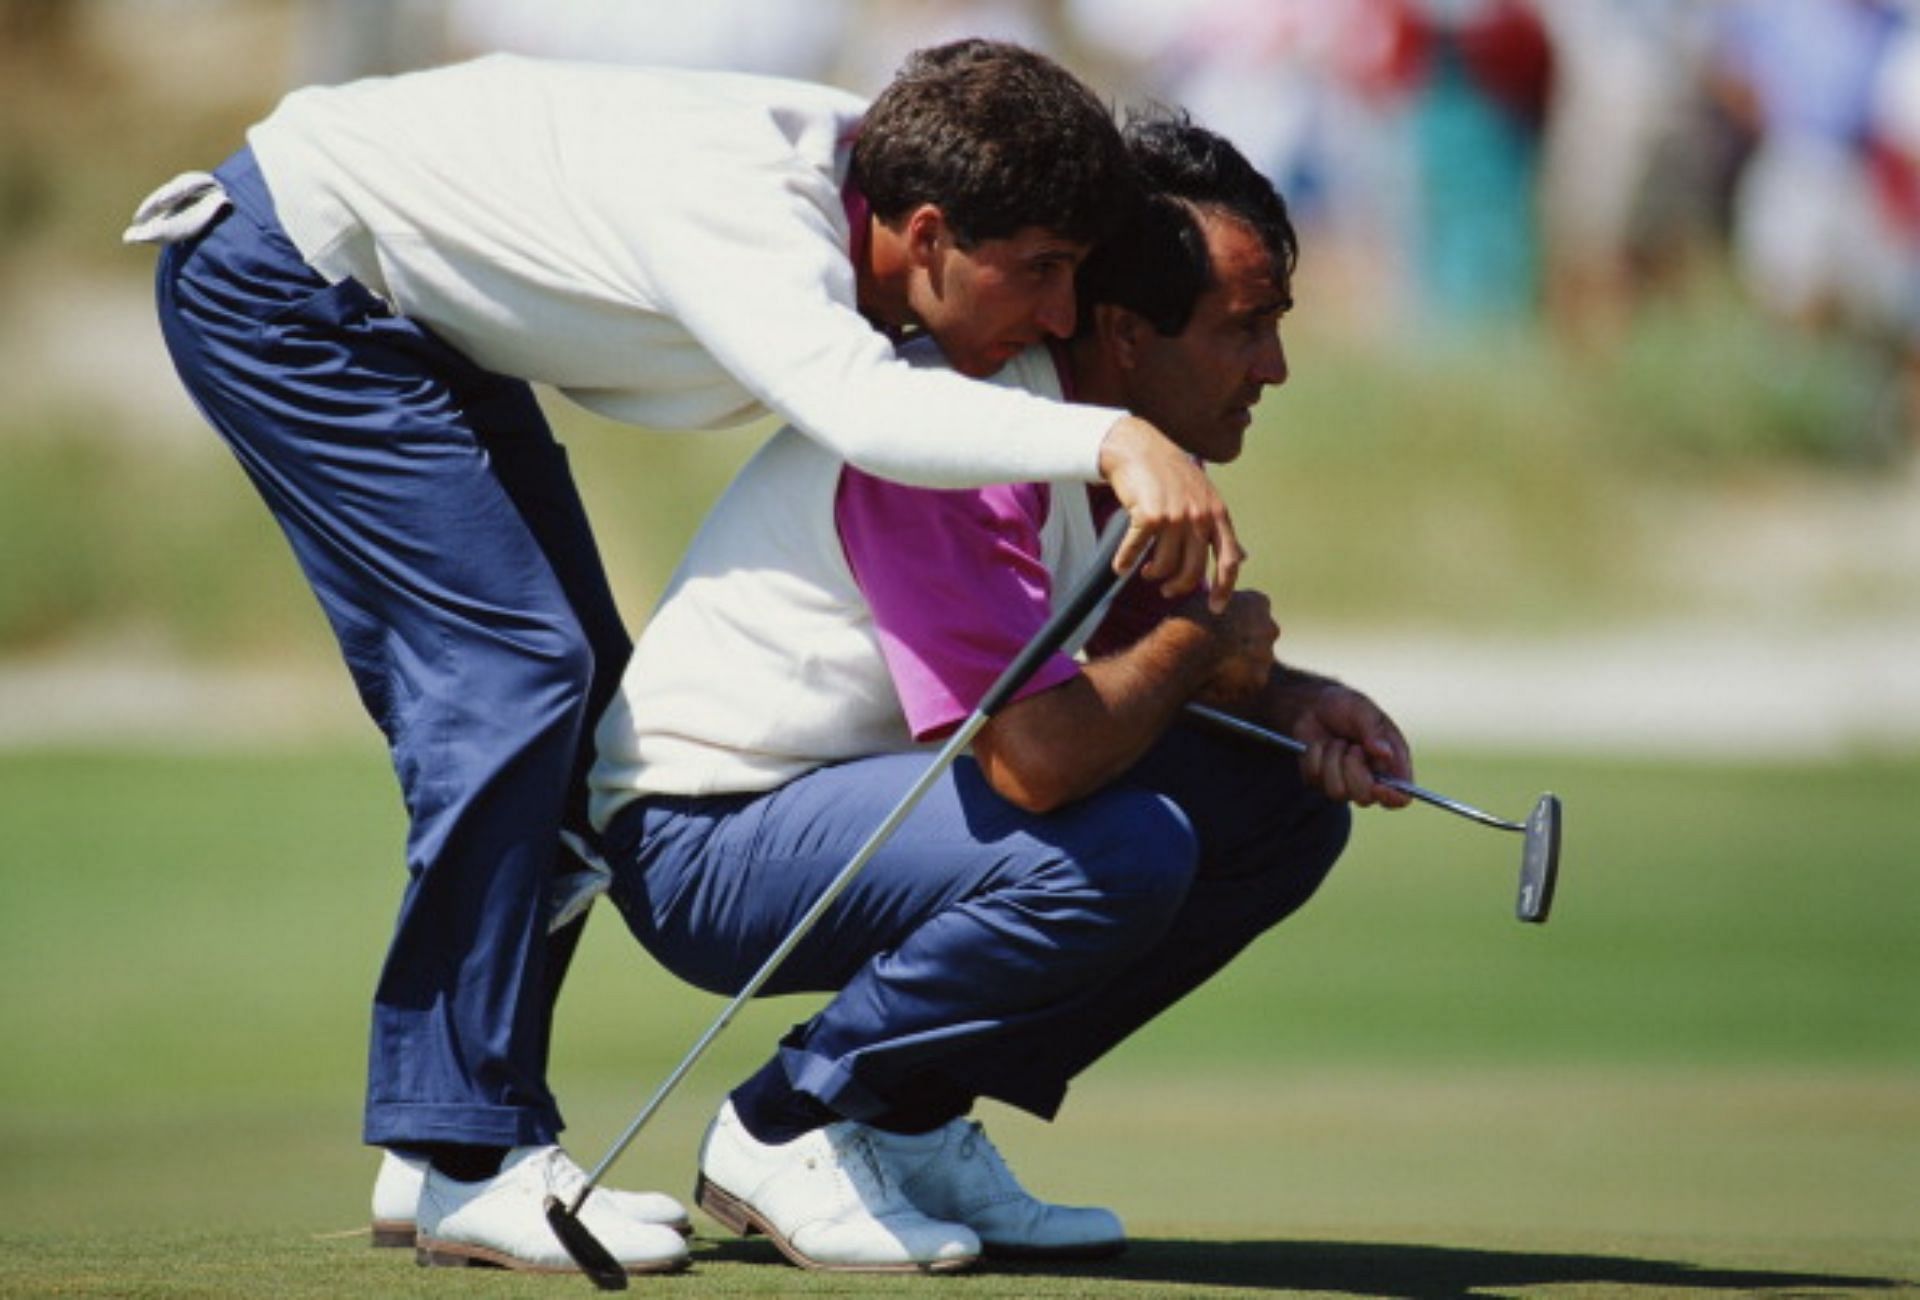 Jose Maria Olazabal and Seve Ballesteros, 1991 Ryder Cup (Image via Getty).